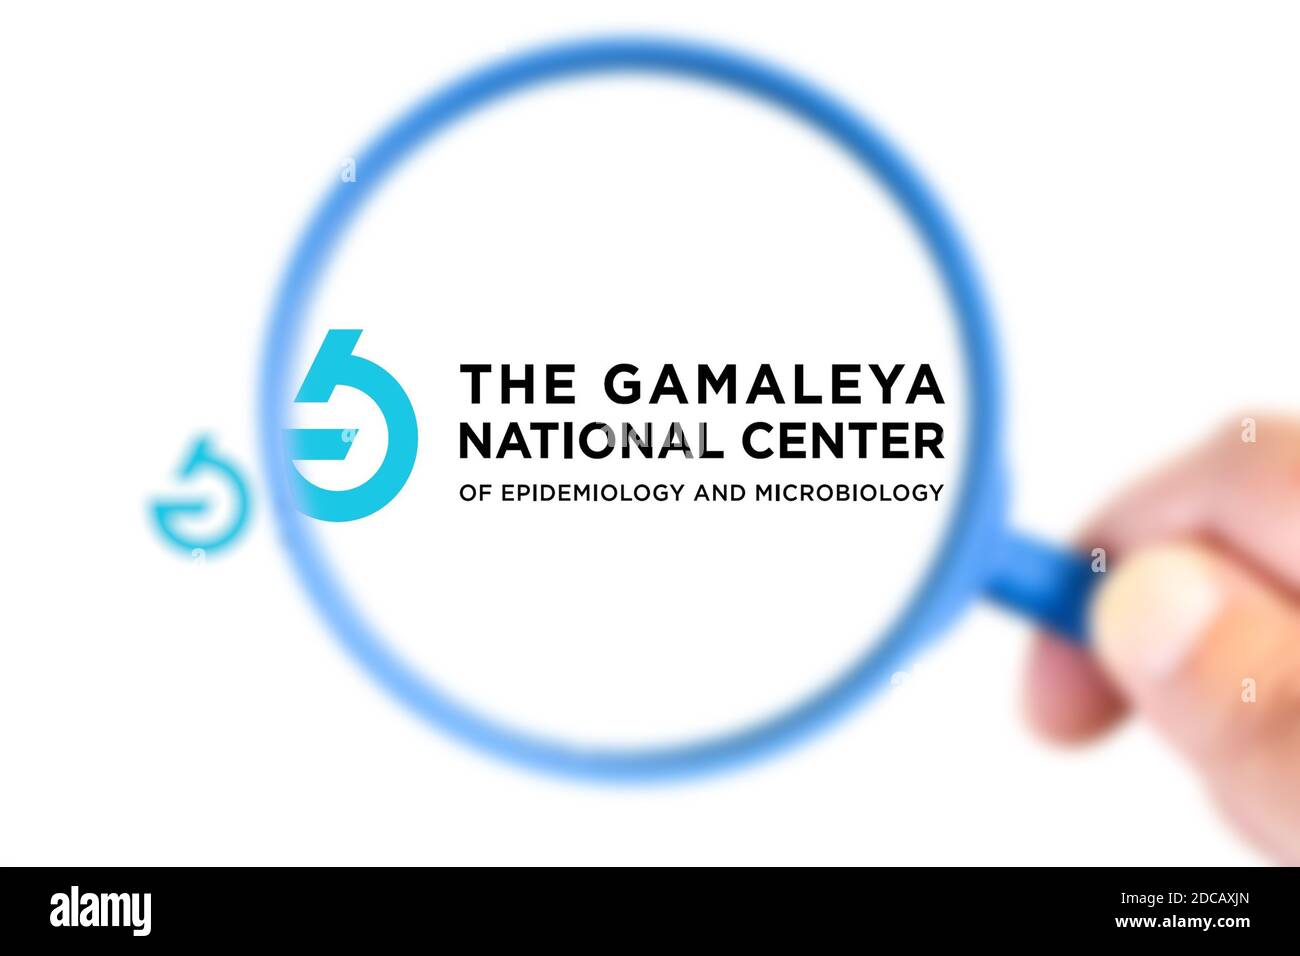 Benon, France - November 20, 2020:Gamaleya National Center research laboratory logotype enlarged with a magnifying glass.This laboratory has developed Stock Photo